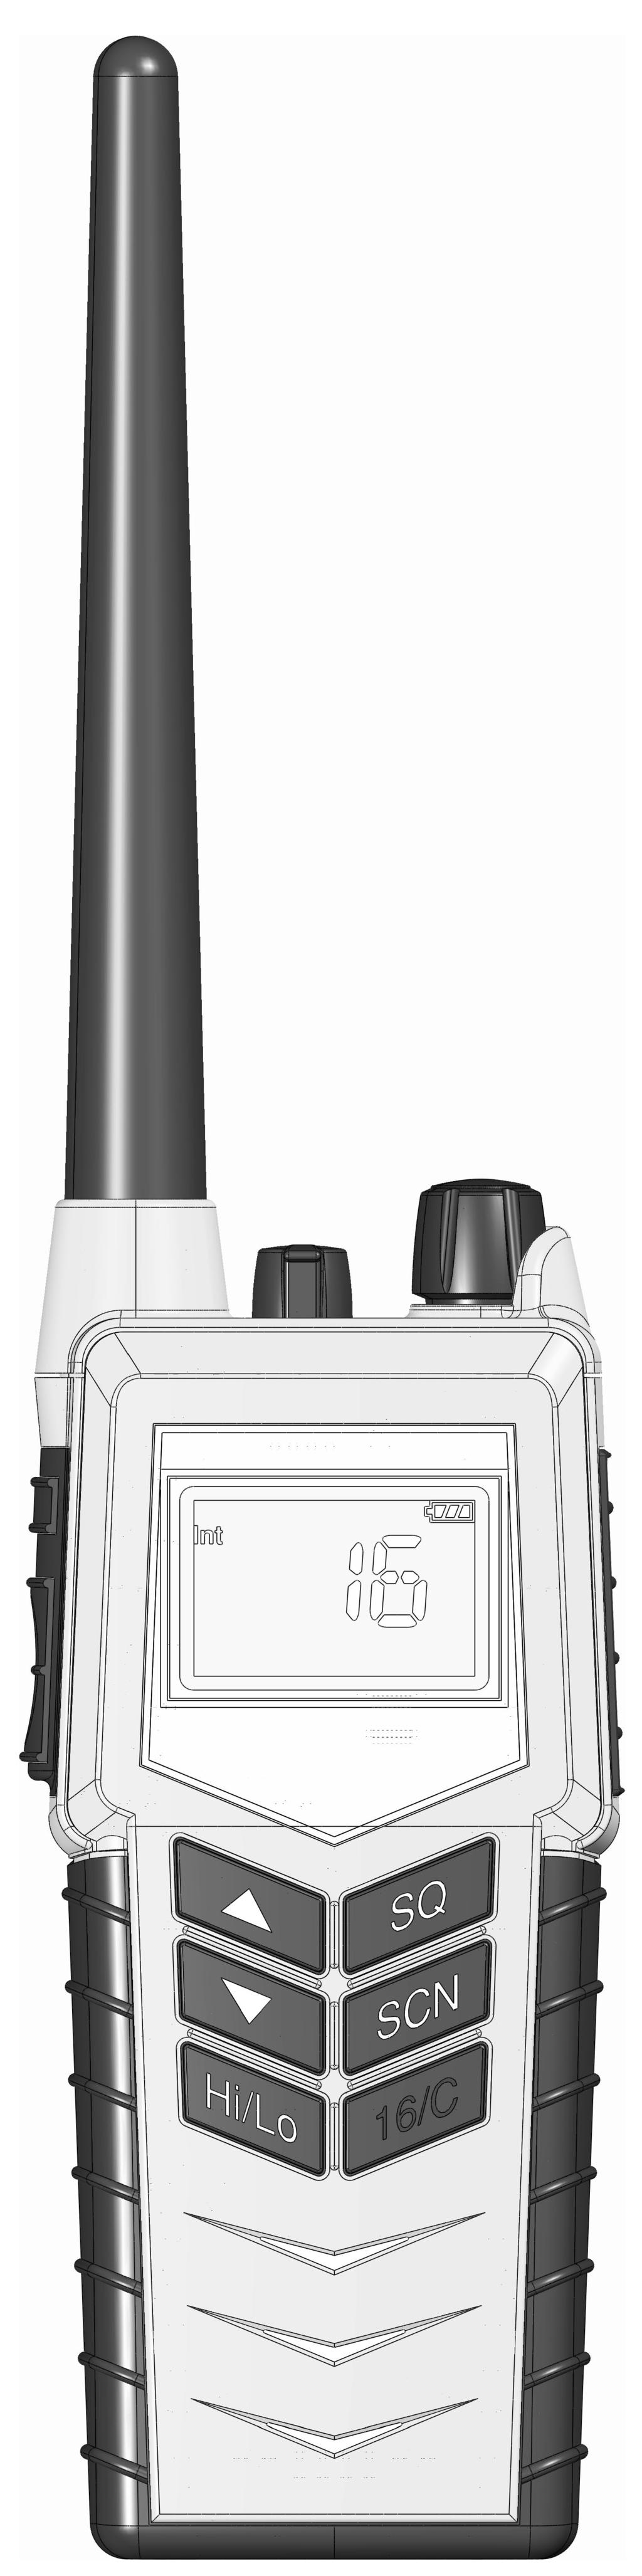 Chapter 1 Introduction Your ATEX VHF GMDSS SP3540, your new SAILOR portable VHF transceiver, is approved to fulfil the GMDSS requirements for portable VHF radios for Safety at Sea and is waterproof